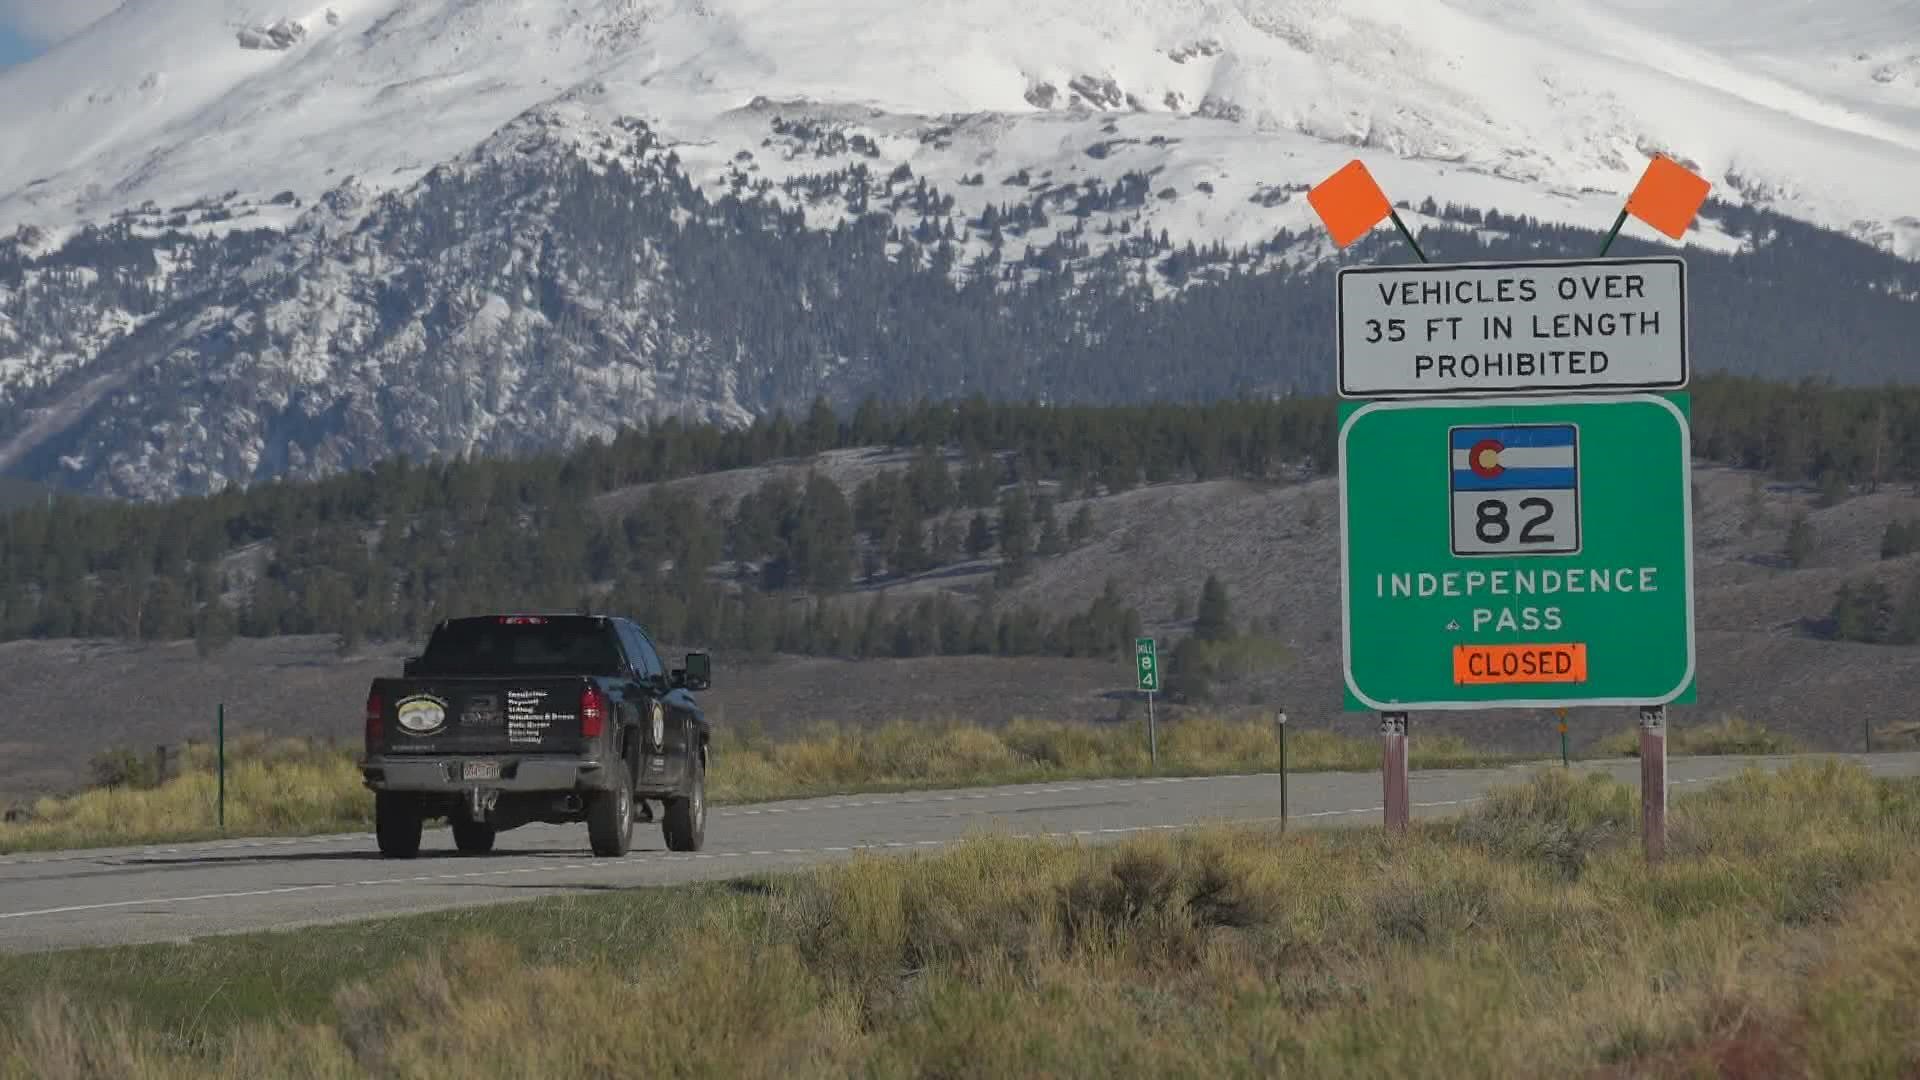 Colorado's beautiful Independence Pass opens for summer 2022